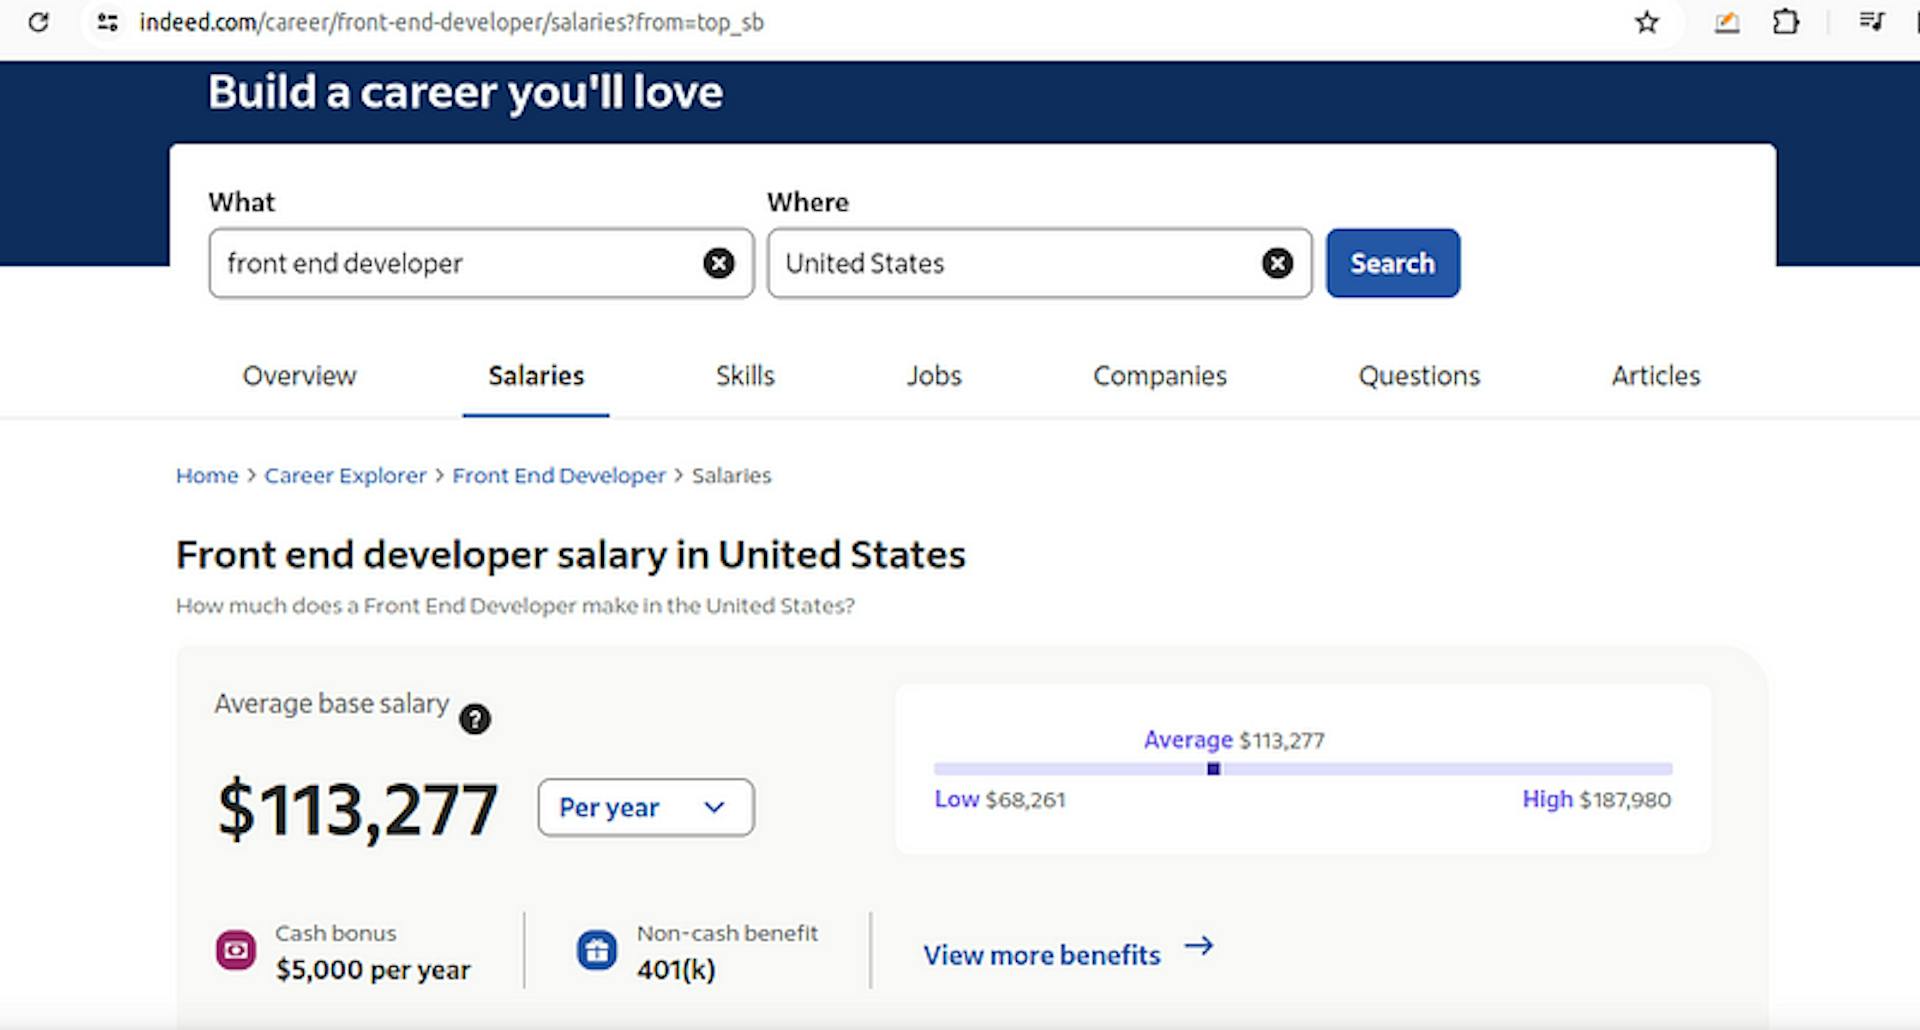 Front end developer avg salary in the US